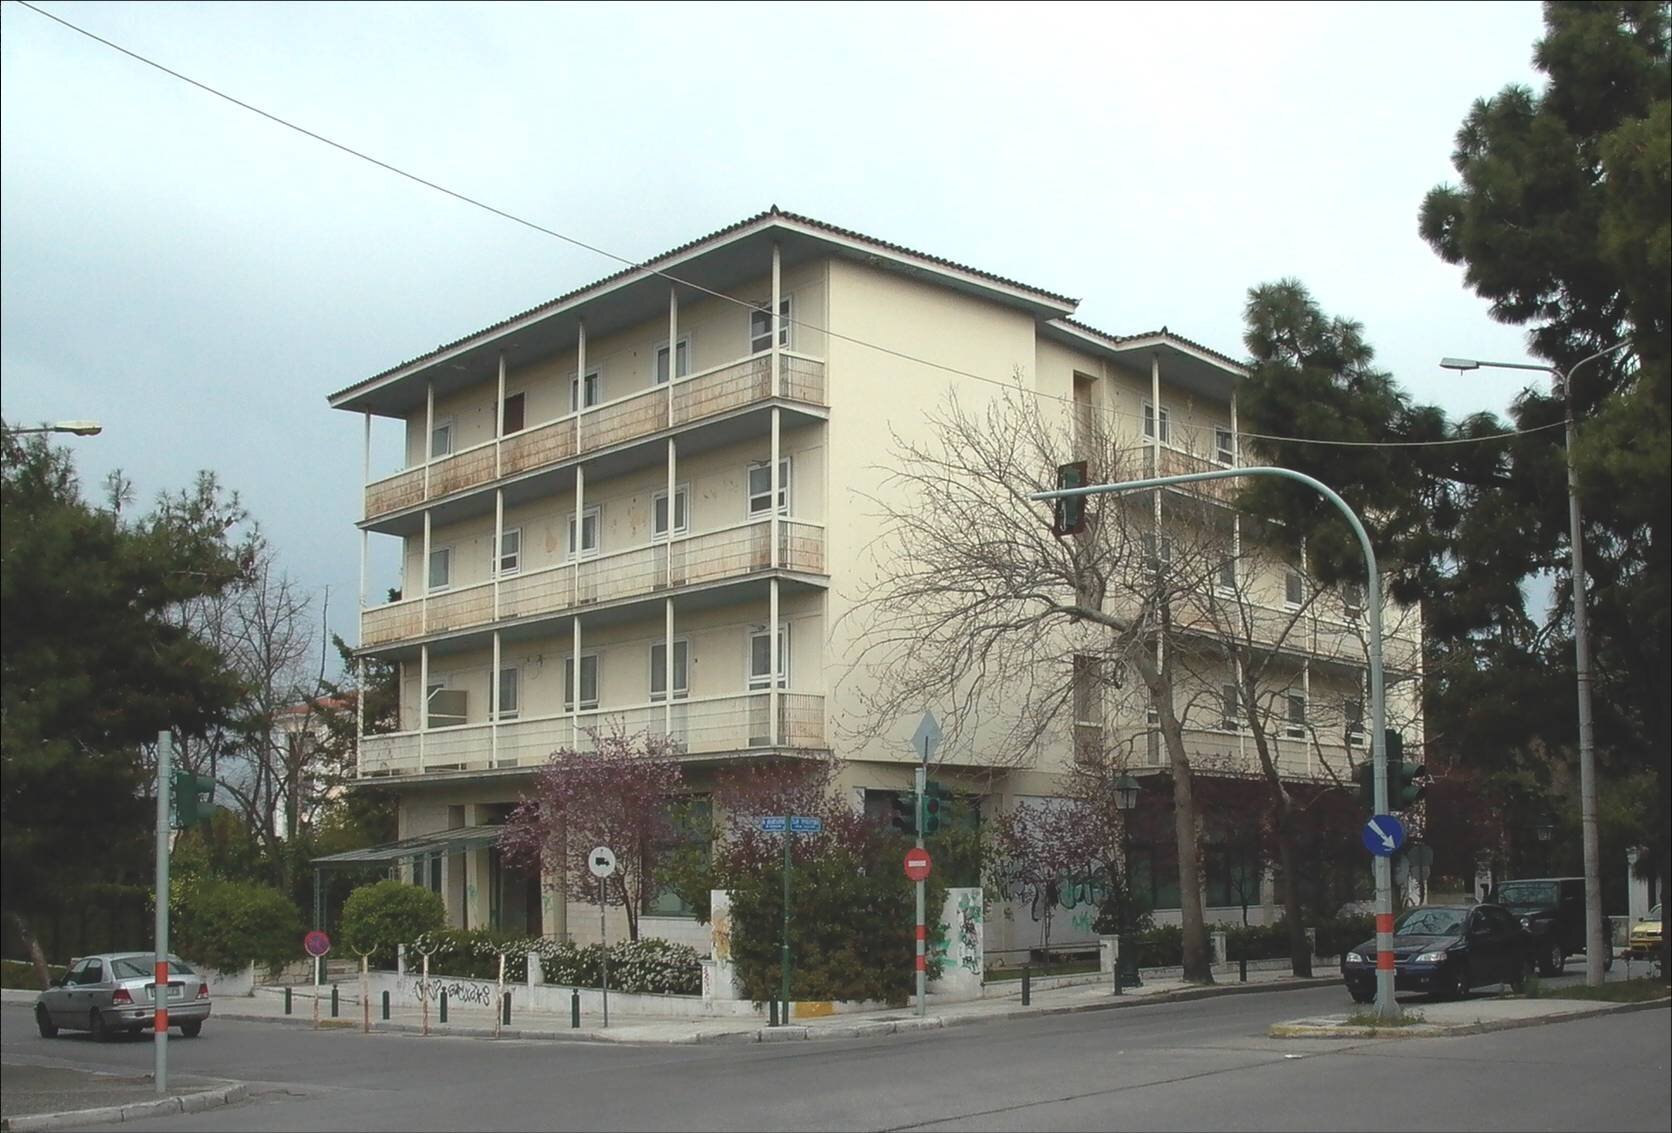 ADAPTIVE REUSE OF A 1950S SMALL HOTEL INTO AN OFFICE BUILDING _ KIFISSIA